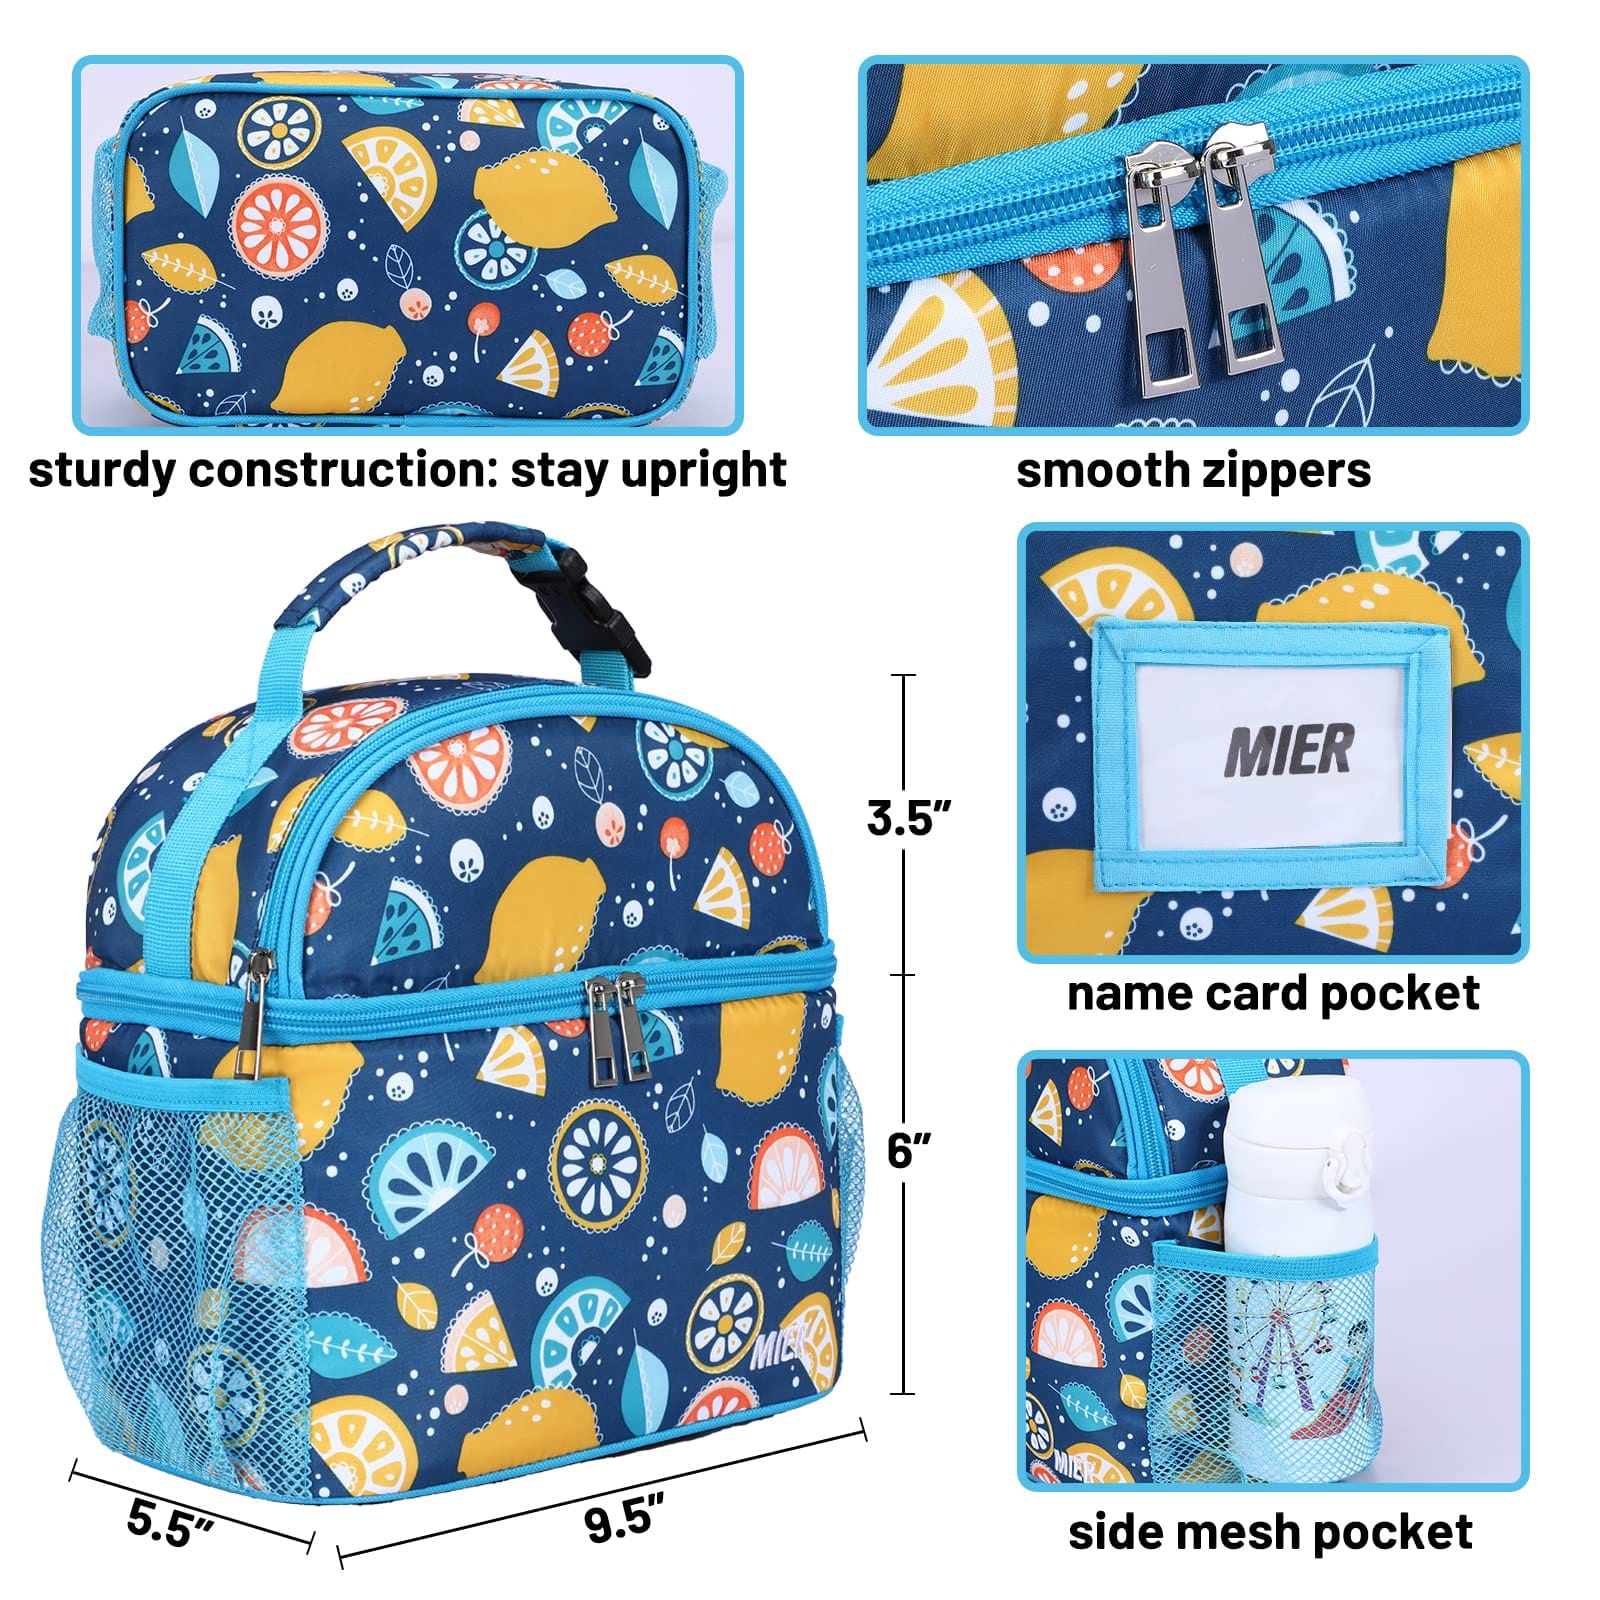 MIER 2 Compartment Kids Small Lunch Box Bag for Boys Girls Toddlers, Adult  Leakproof Cooler Insulate…See more MIER 2 Compartment Kids Small Lunch Box